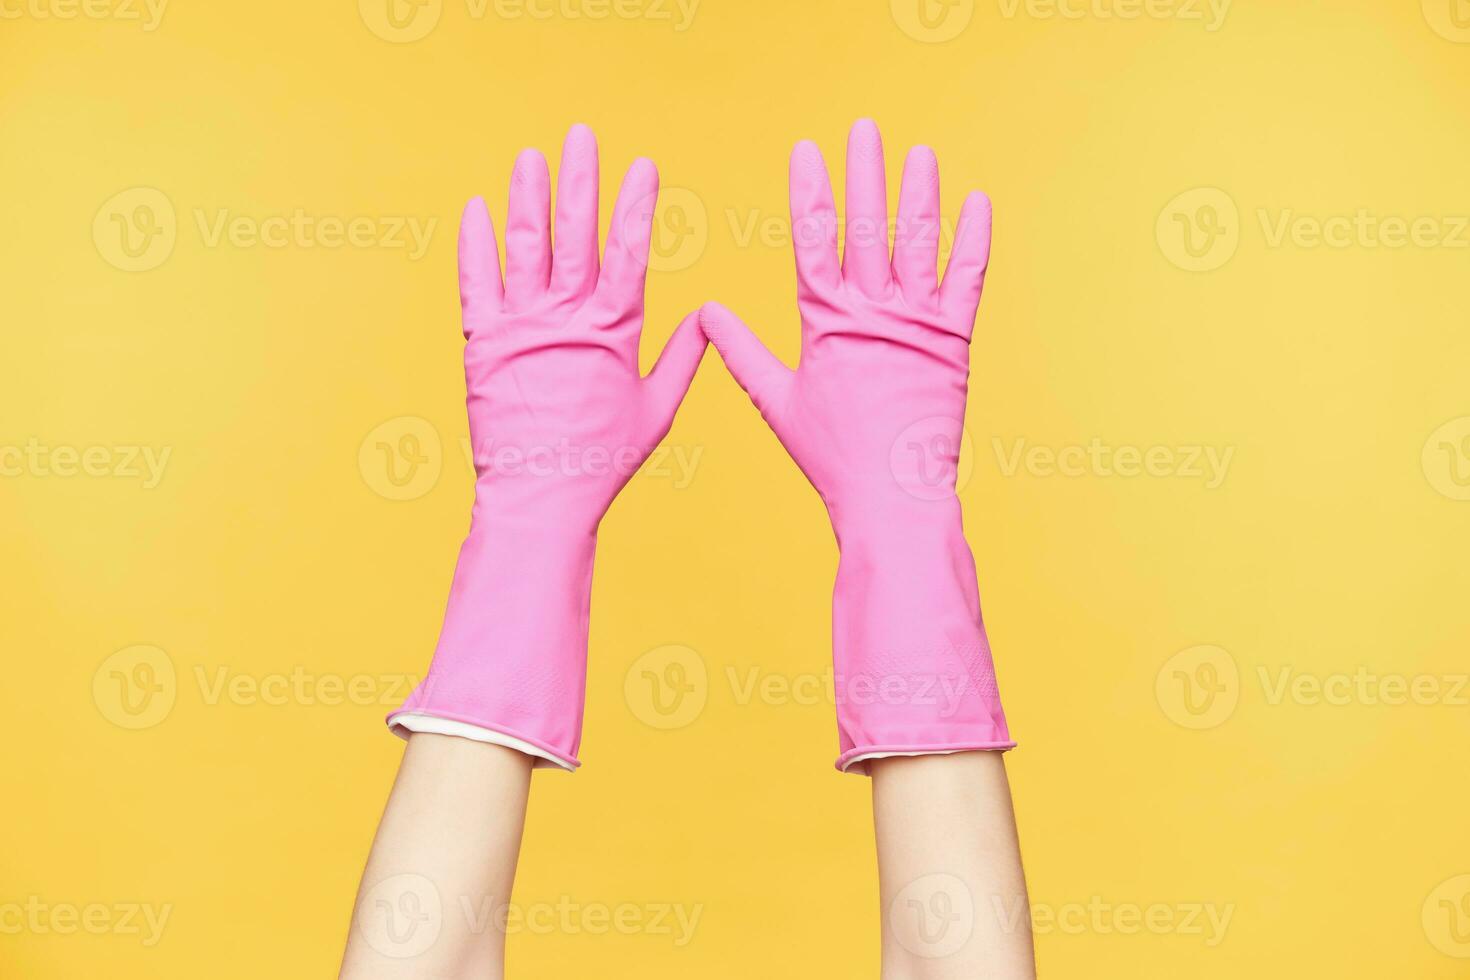 Front view of raised hands in red rubber gloves being isolated against orange background, keeping all fingers separately. Human hands and body concept photo